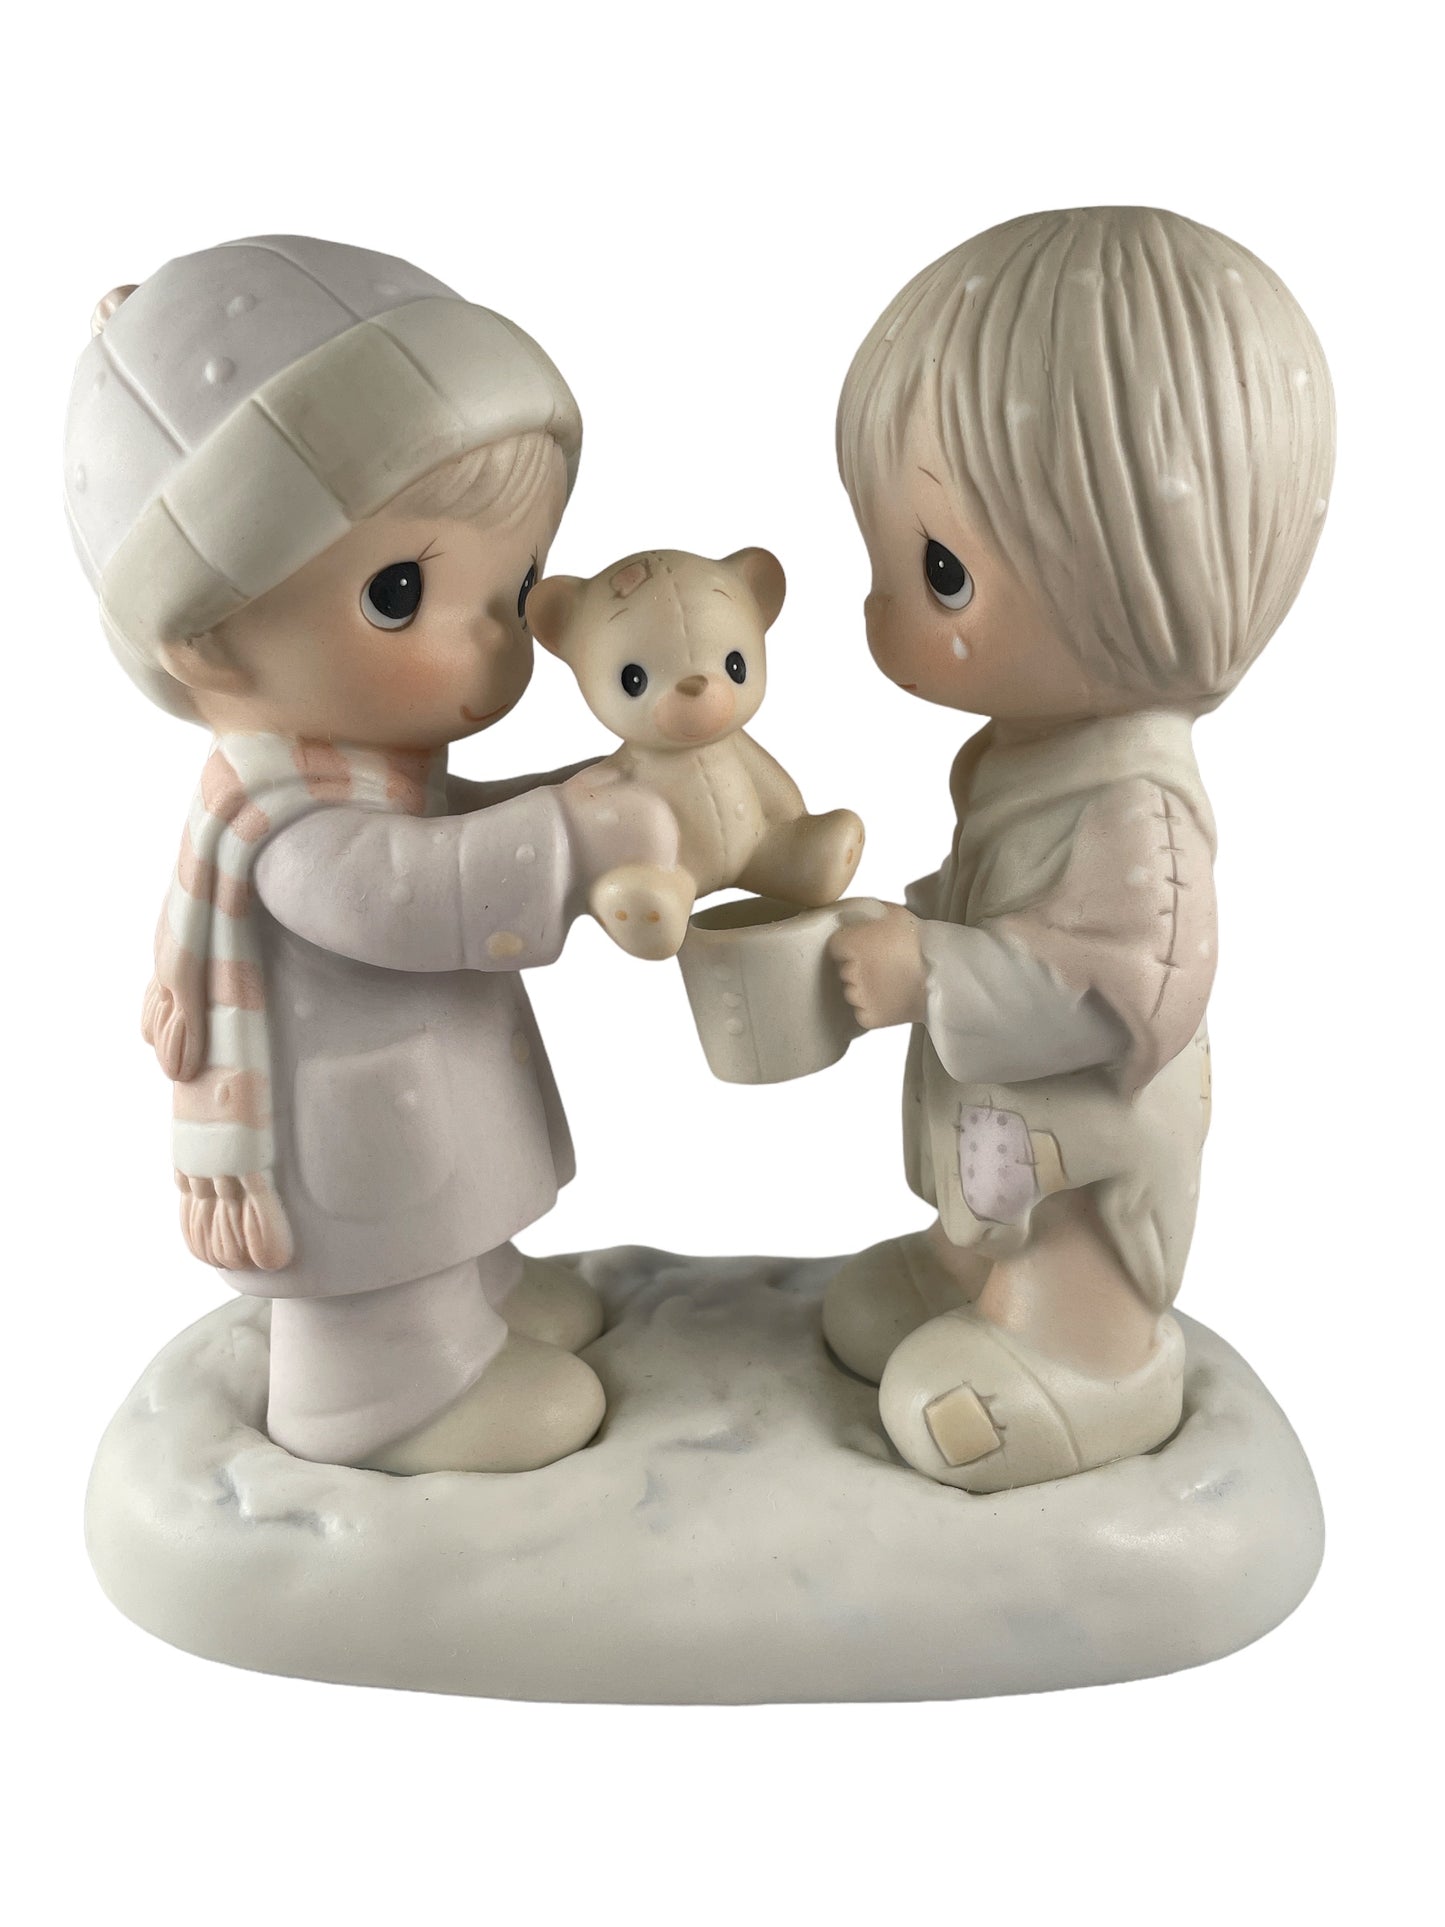 Christmastime Is For Sharing - Precious Moments Figurine E0504